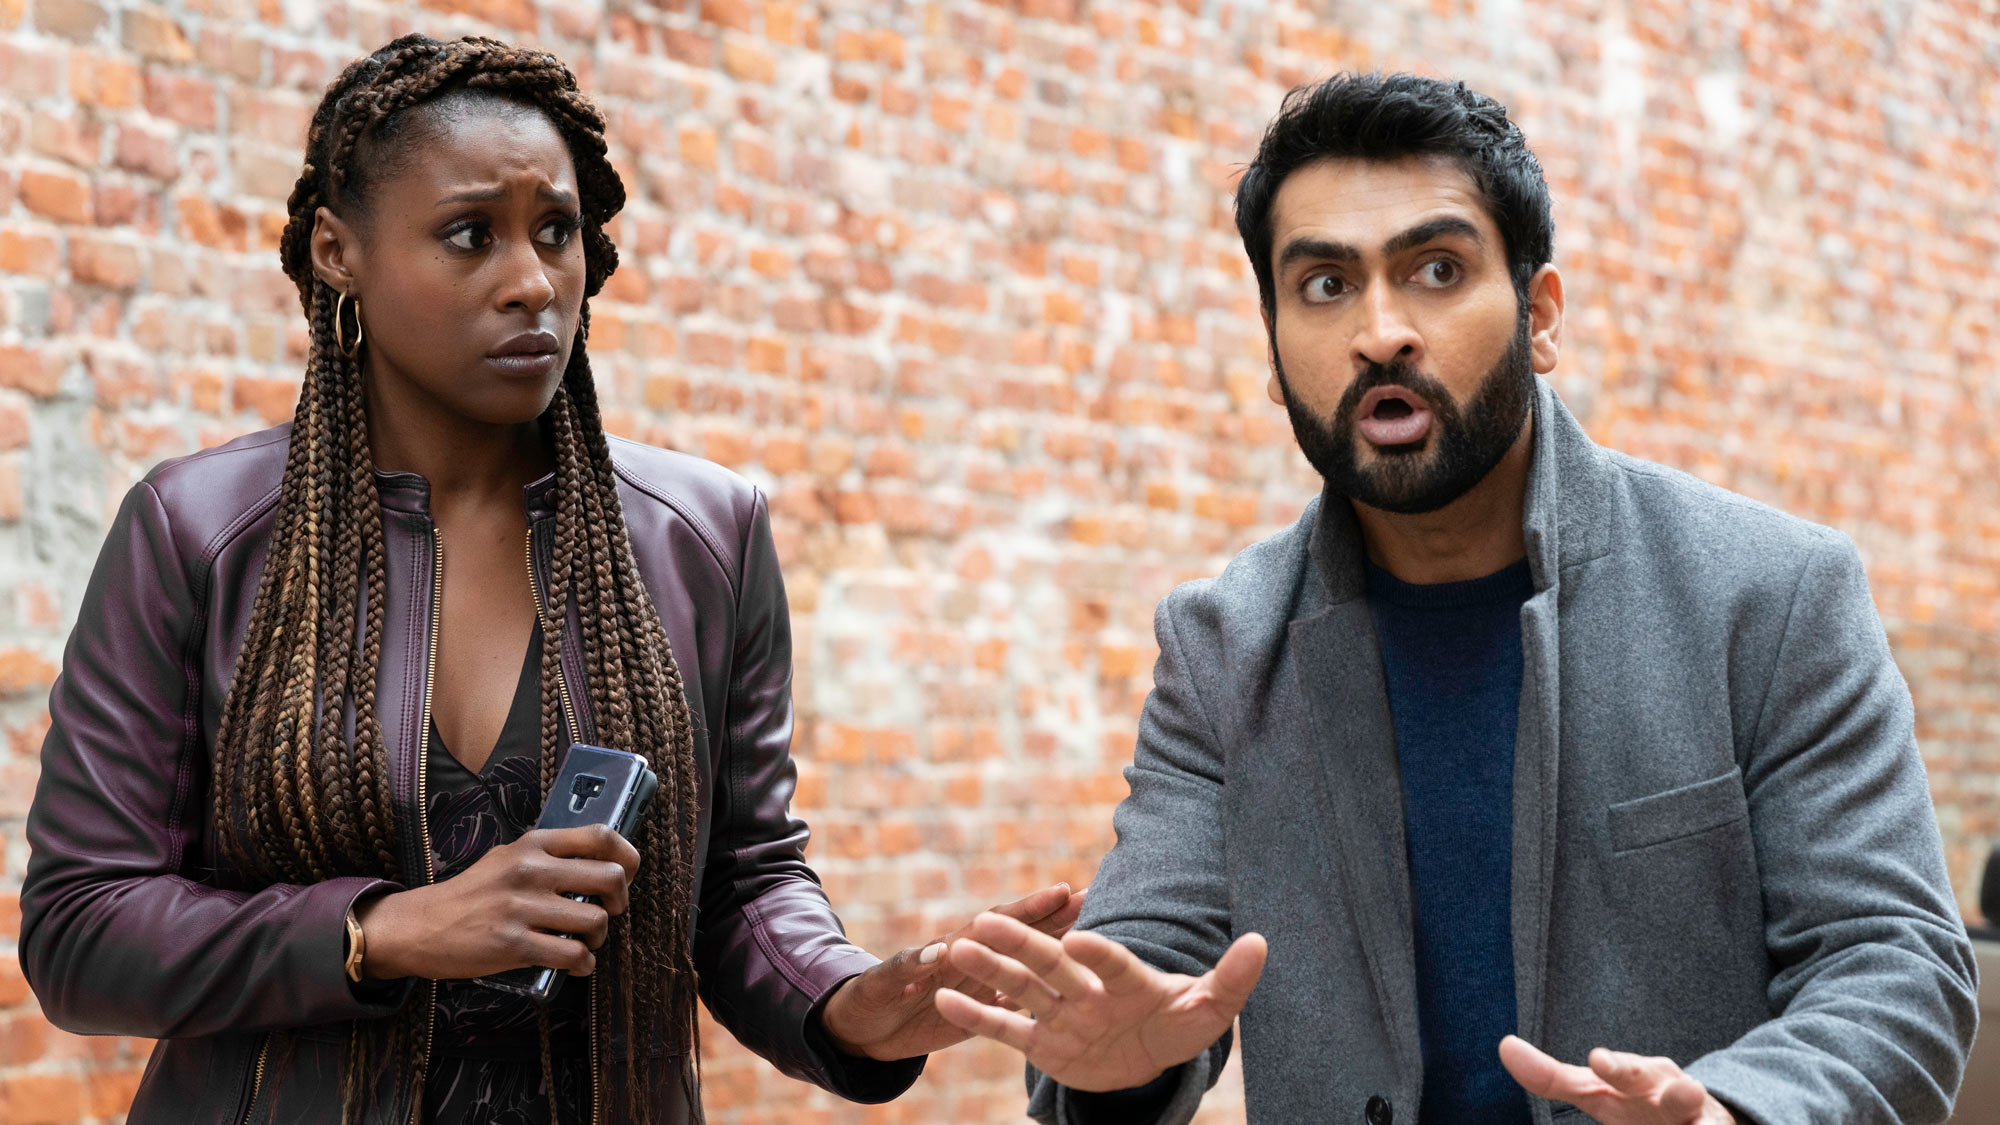 Issa Rae and Kumail Nanjiani in The Lovebirds, one of the Best Netflix movies